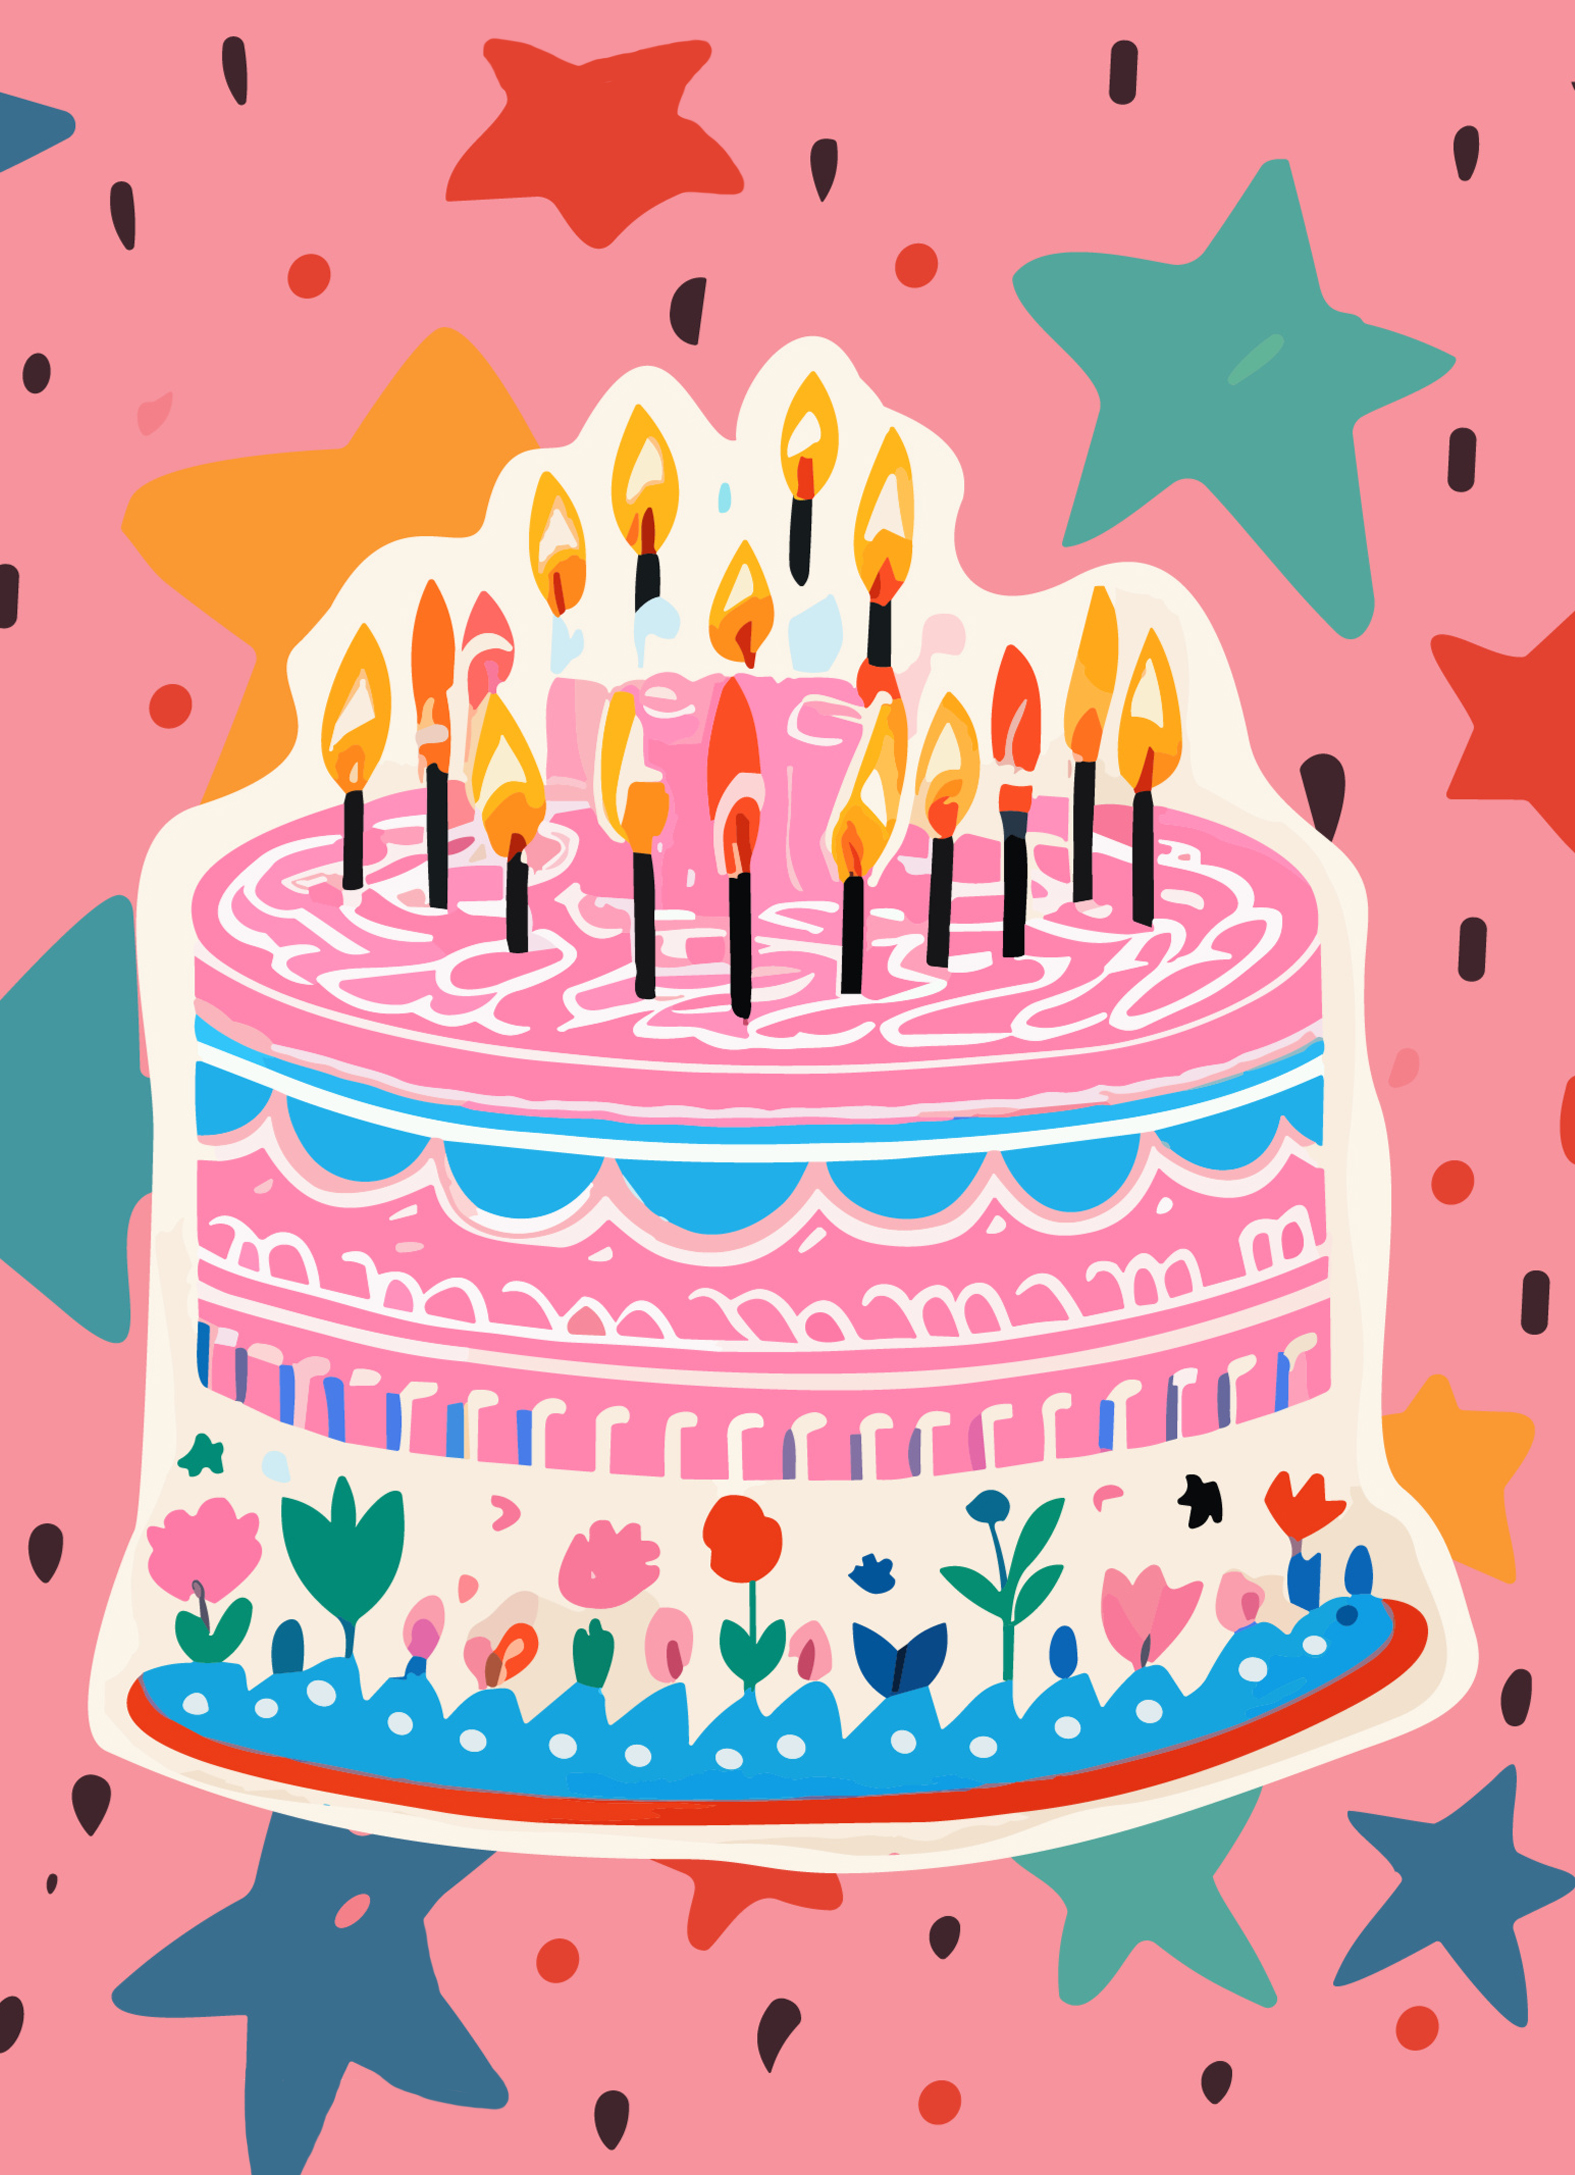 Happiest Birthday Wishes Lettering Ecard Cover